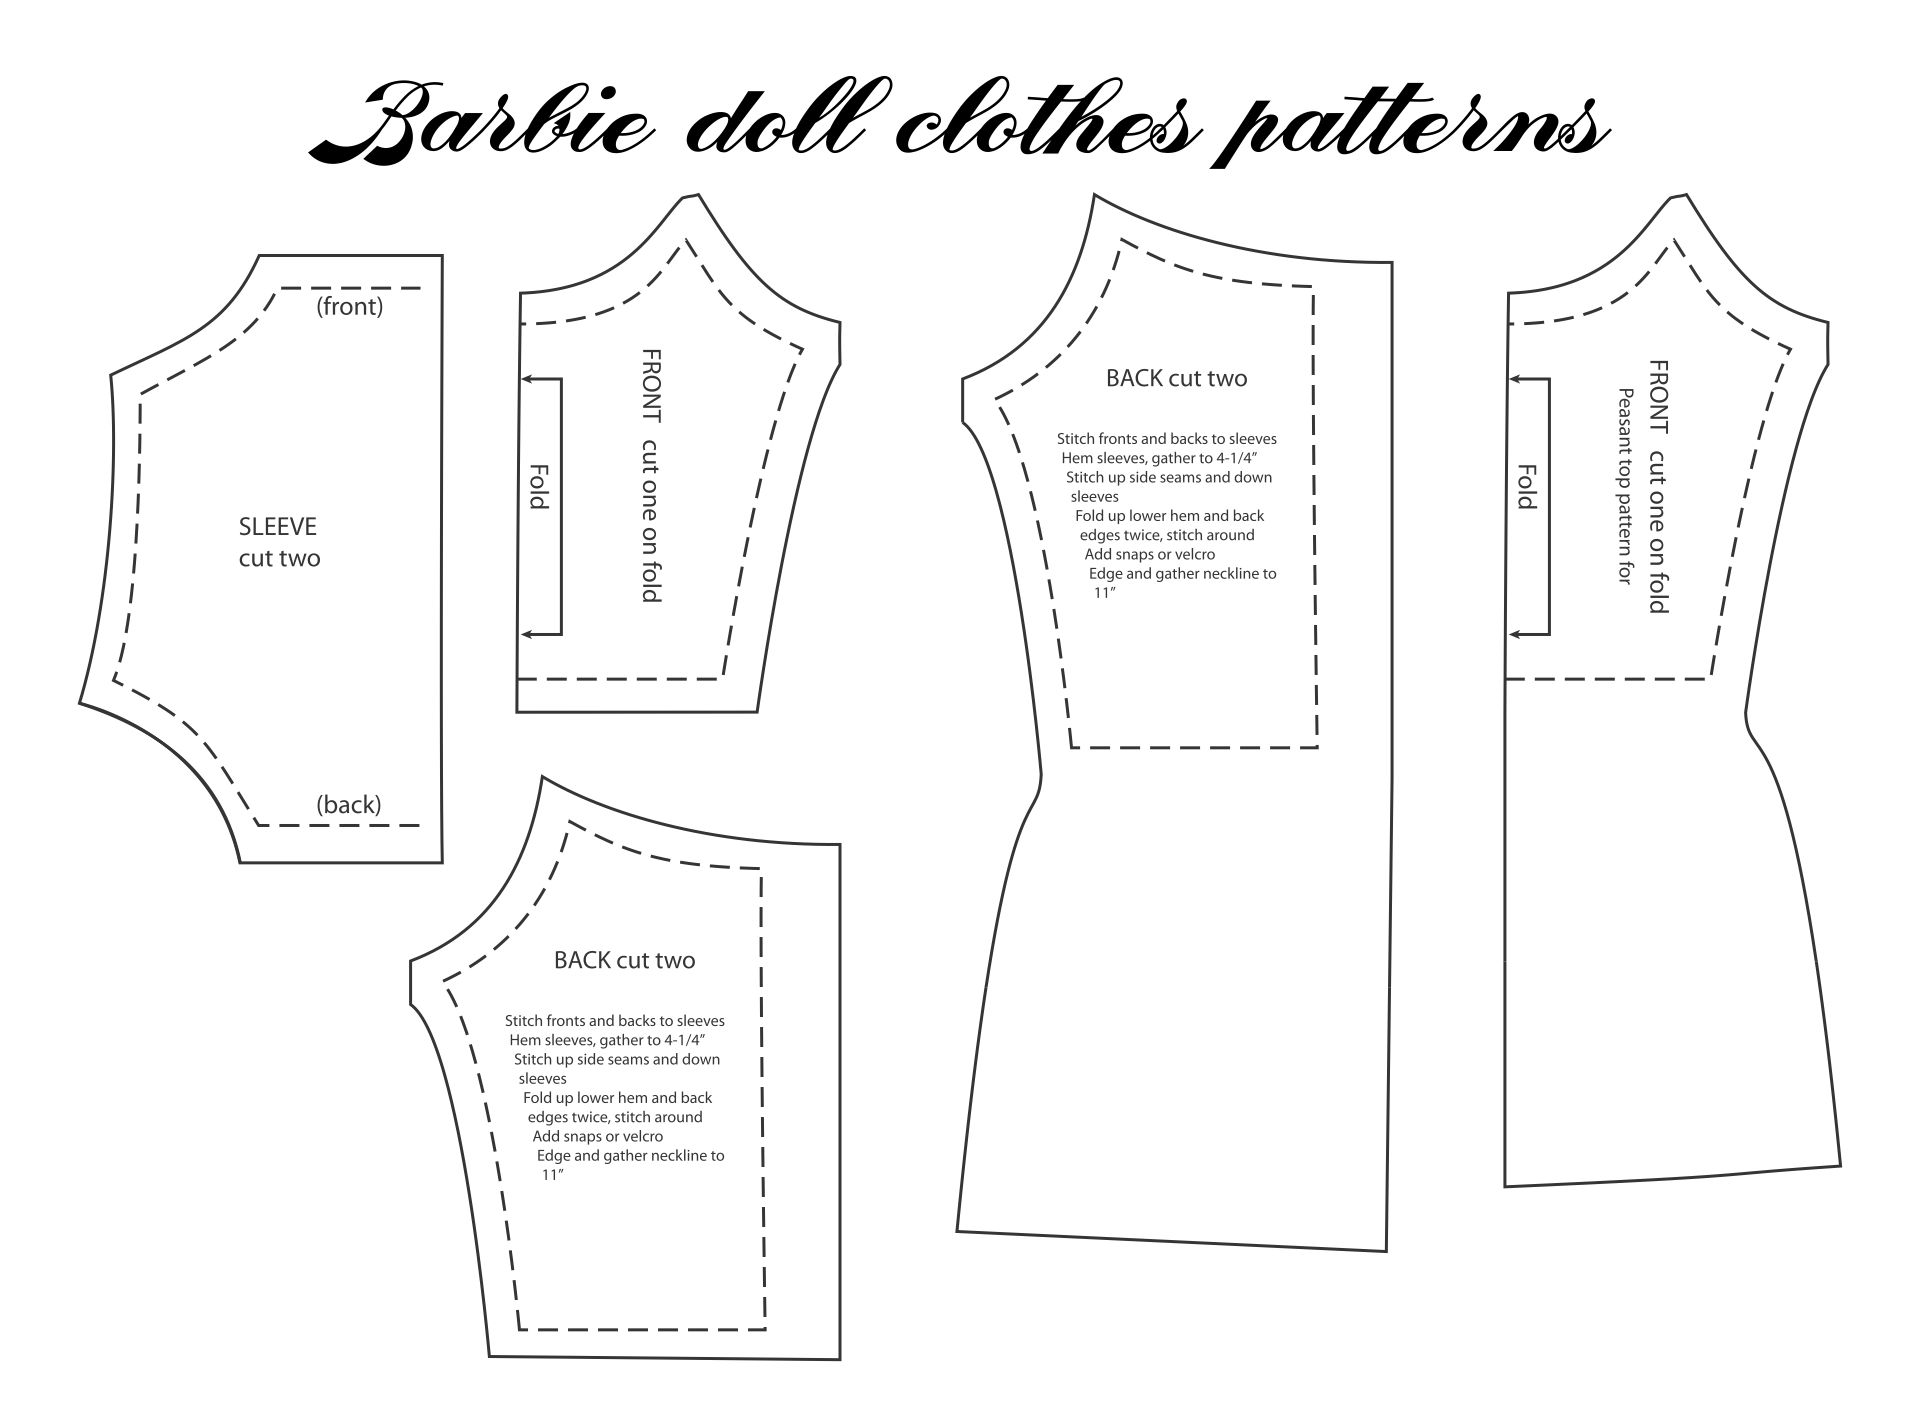 how-to-draft-patterns-for-diy-barbie-clothes-the-shapes-of-fabric